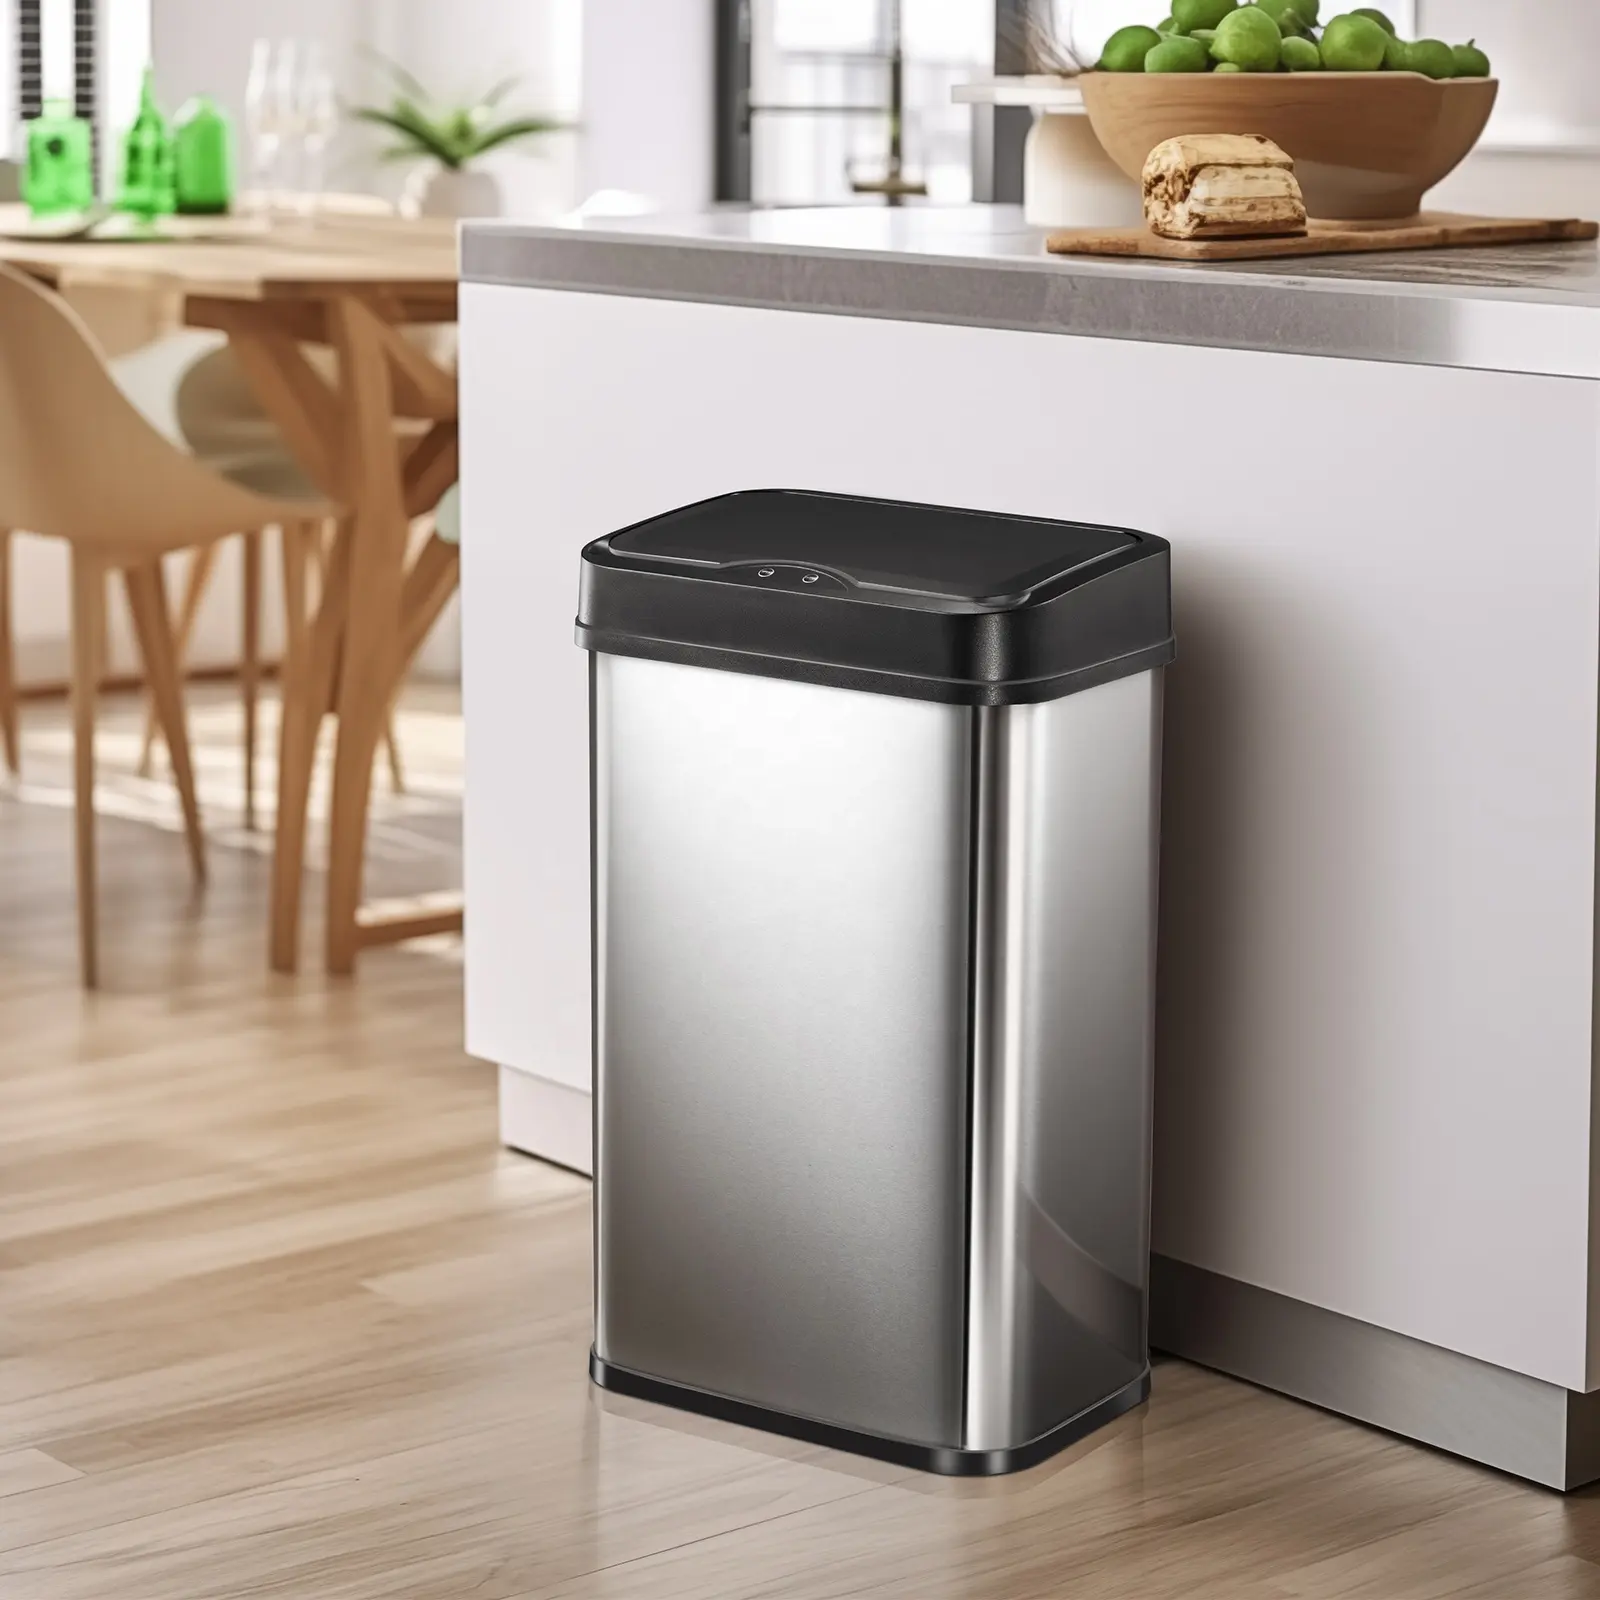 50L Stainless Steel Waste Bin With Plastic Sensor Lid Smart Garbege Trash Can Home Products For Kitchen